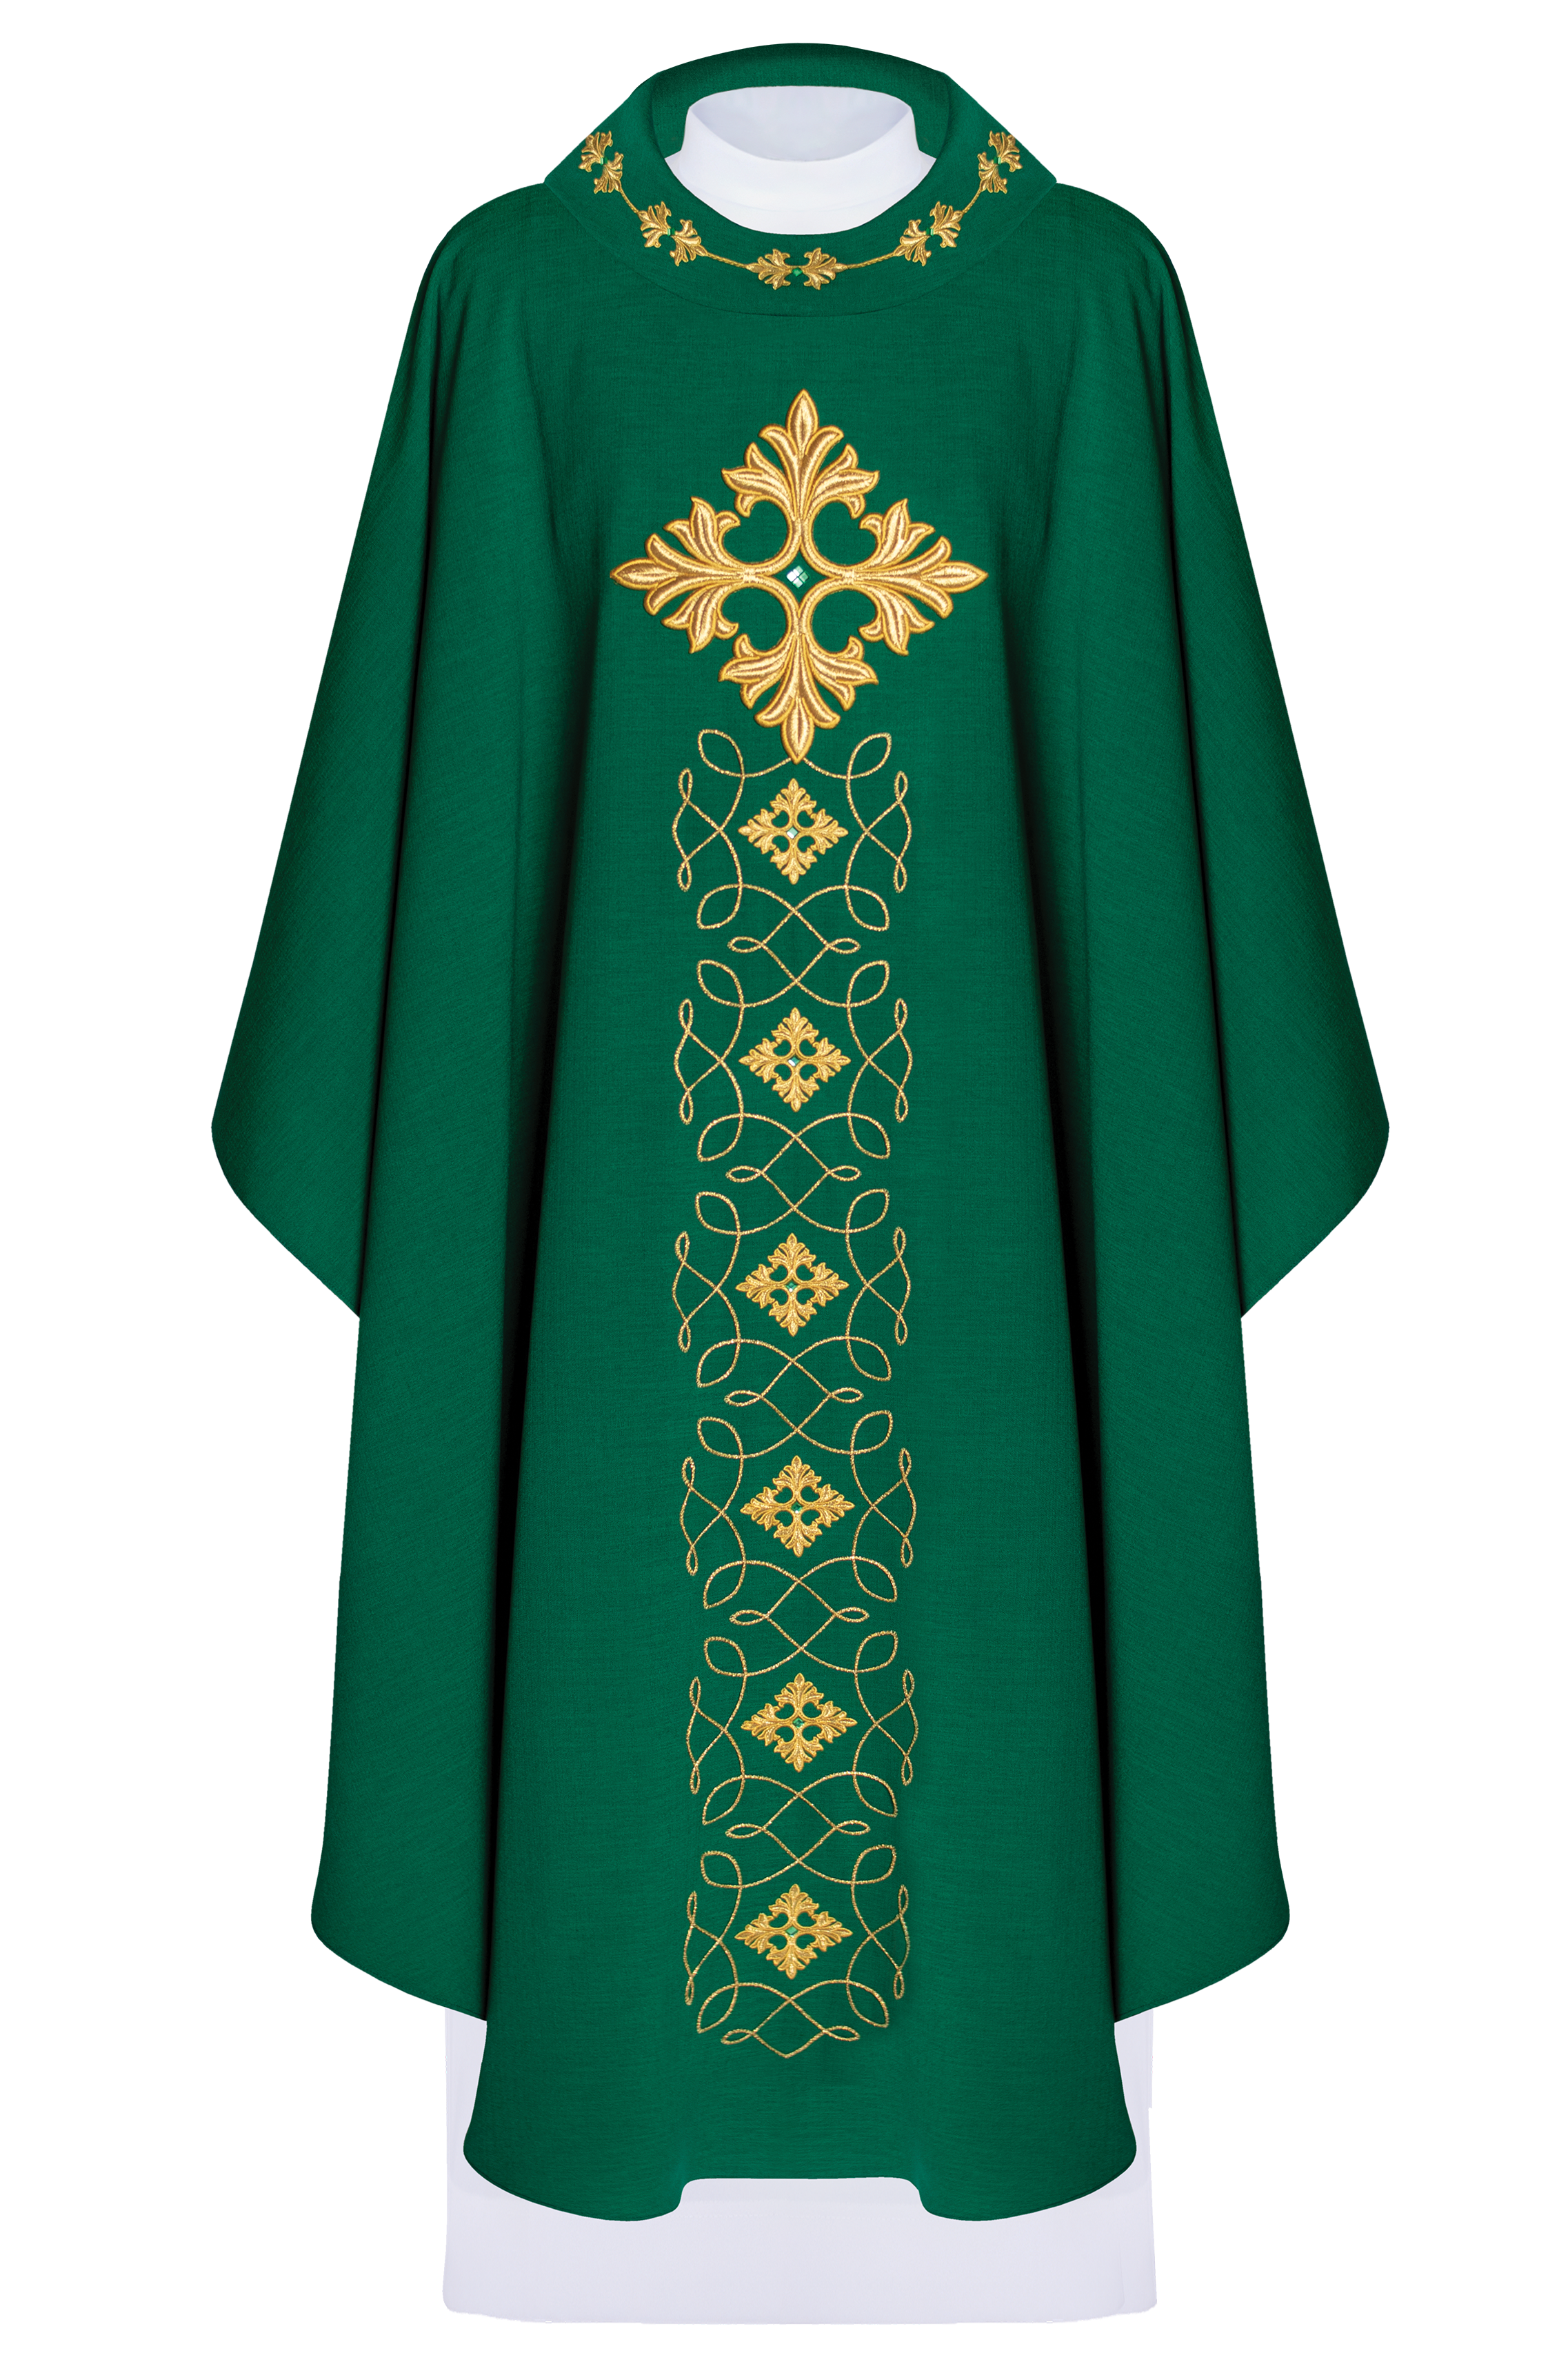 Green chasuble richly embroidered with string and stones